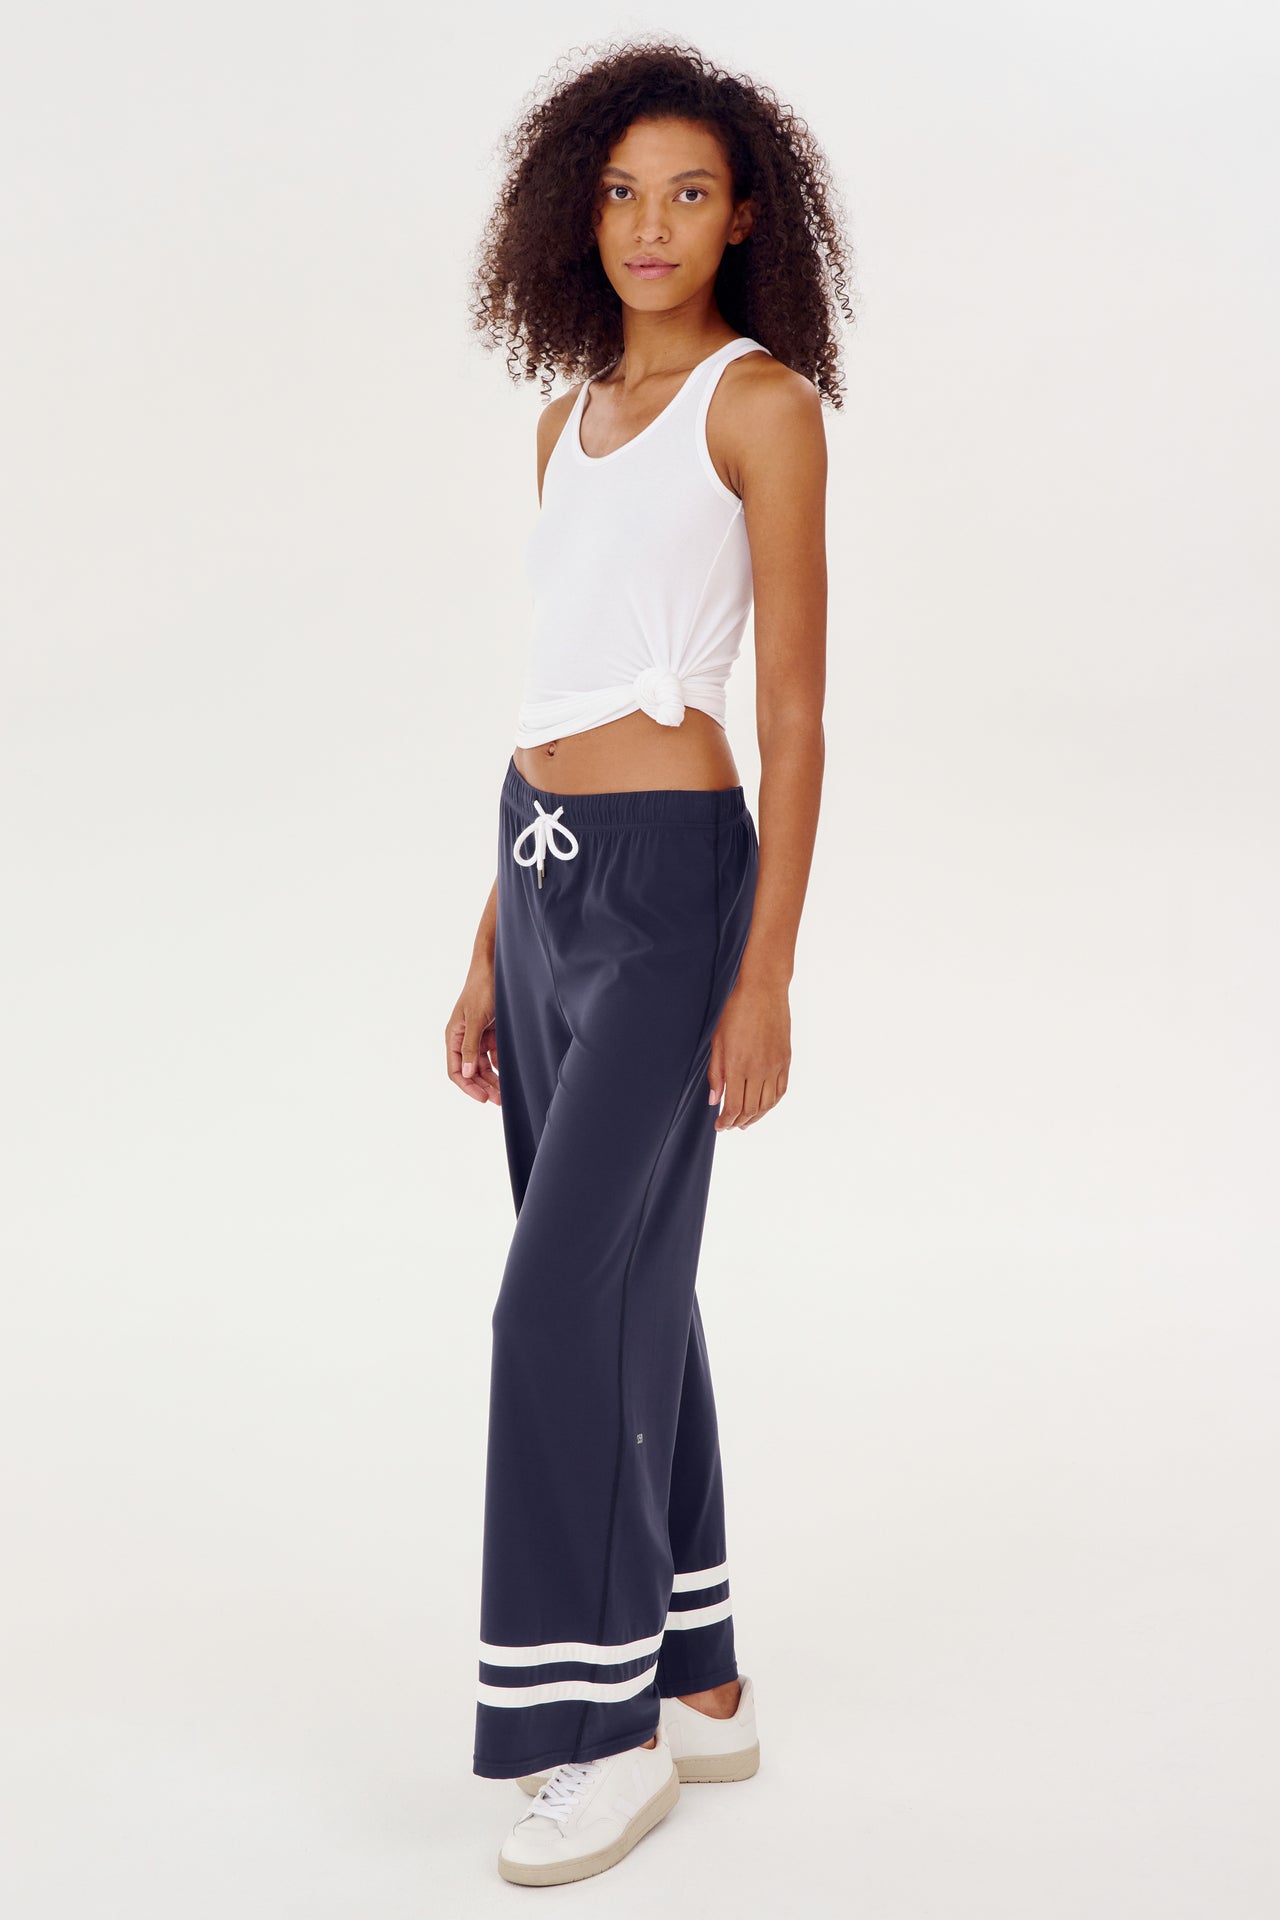 The model is wearing a comfortable white top and SPLITS59 navy Quinn Airweight Wide Leg Pants, ideal for a yoga or workout session.